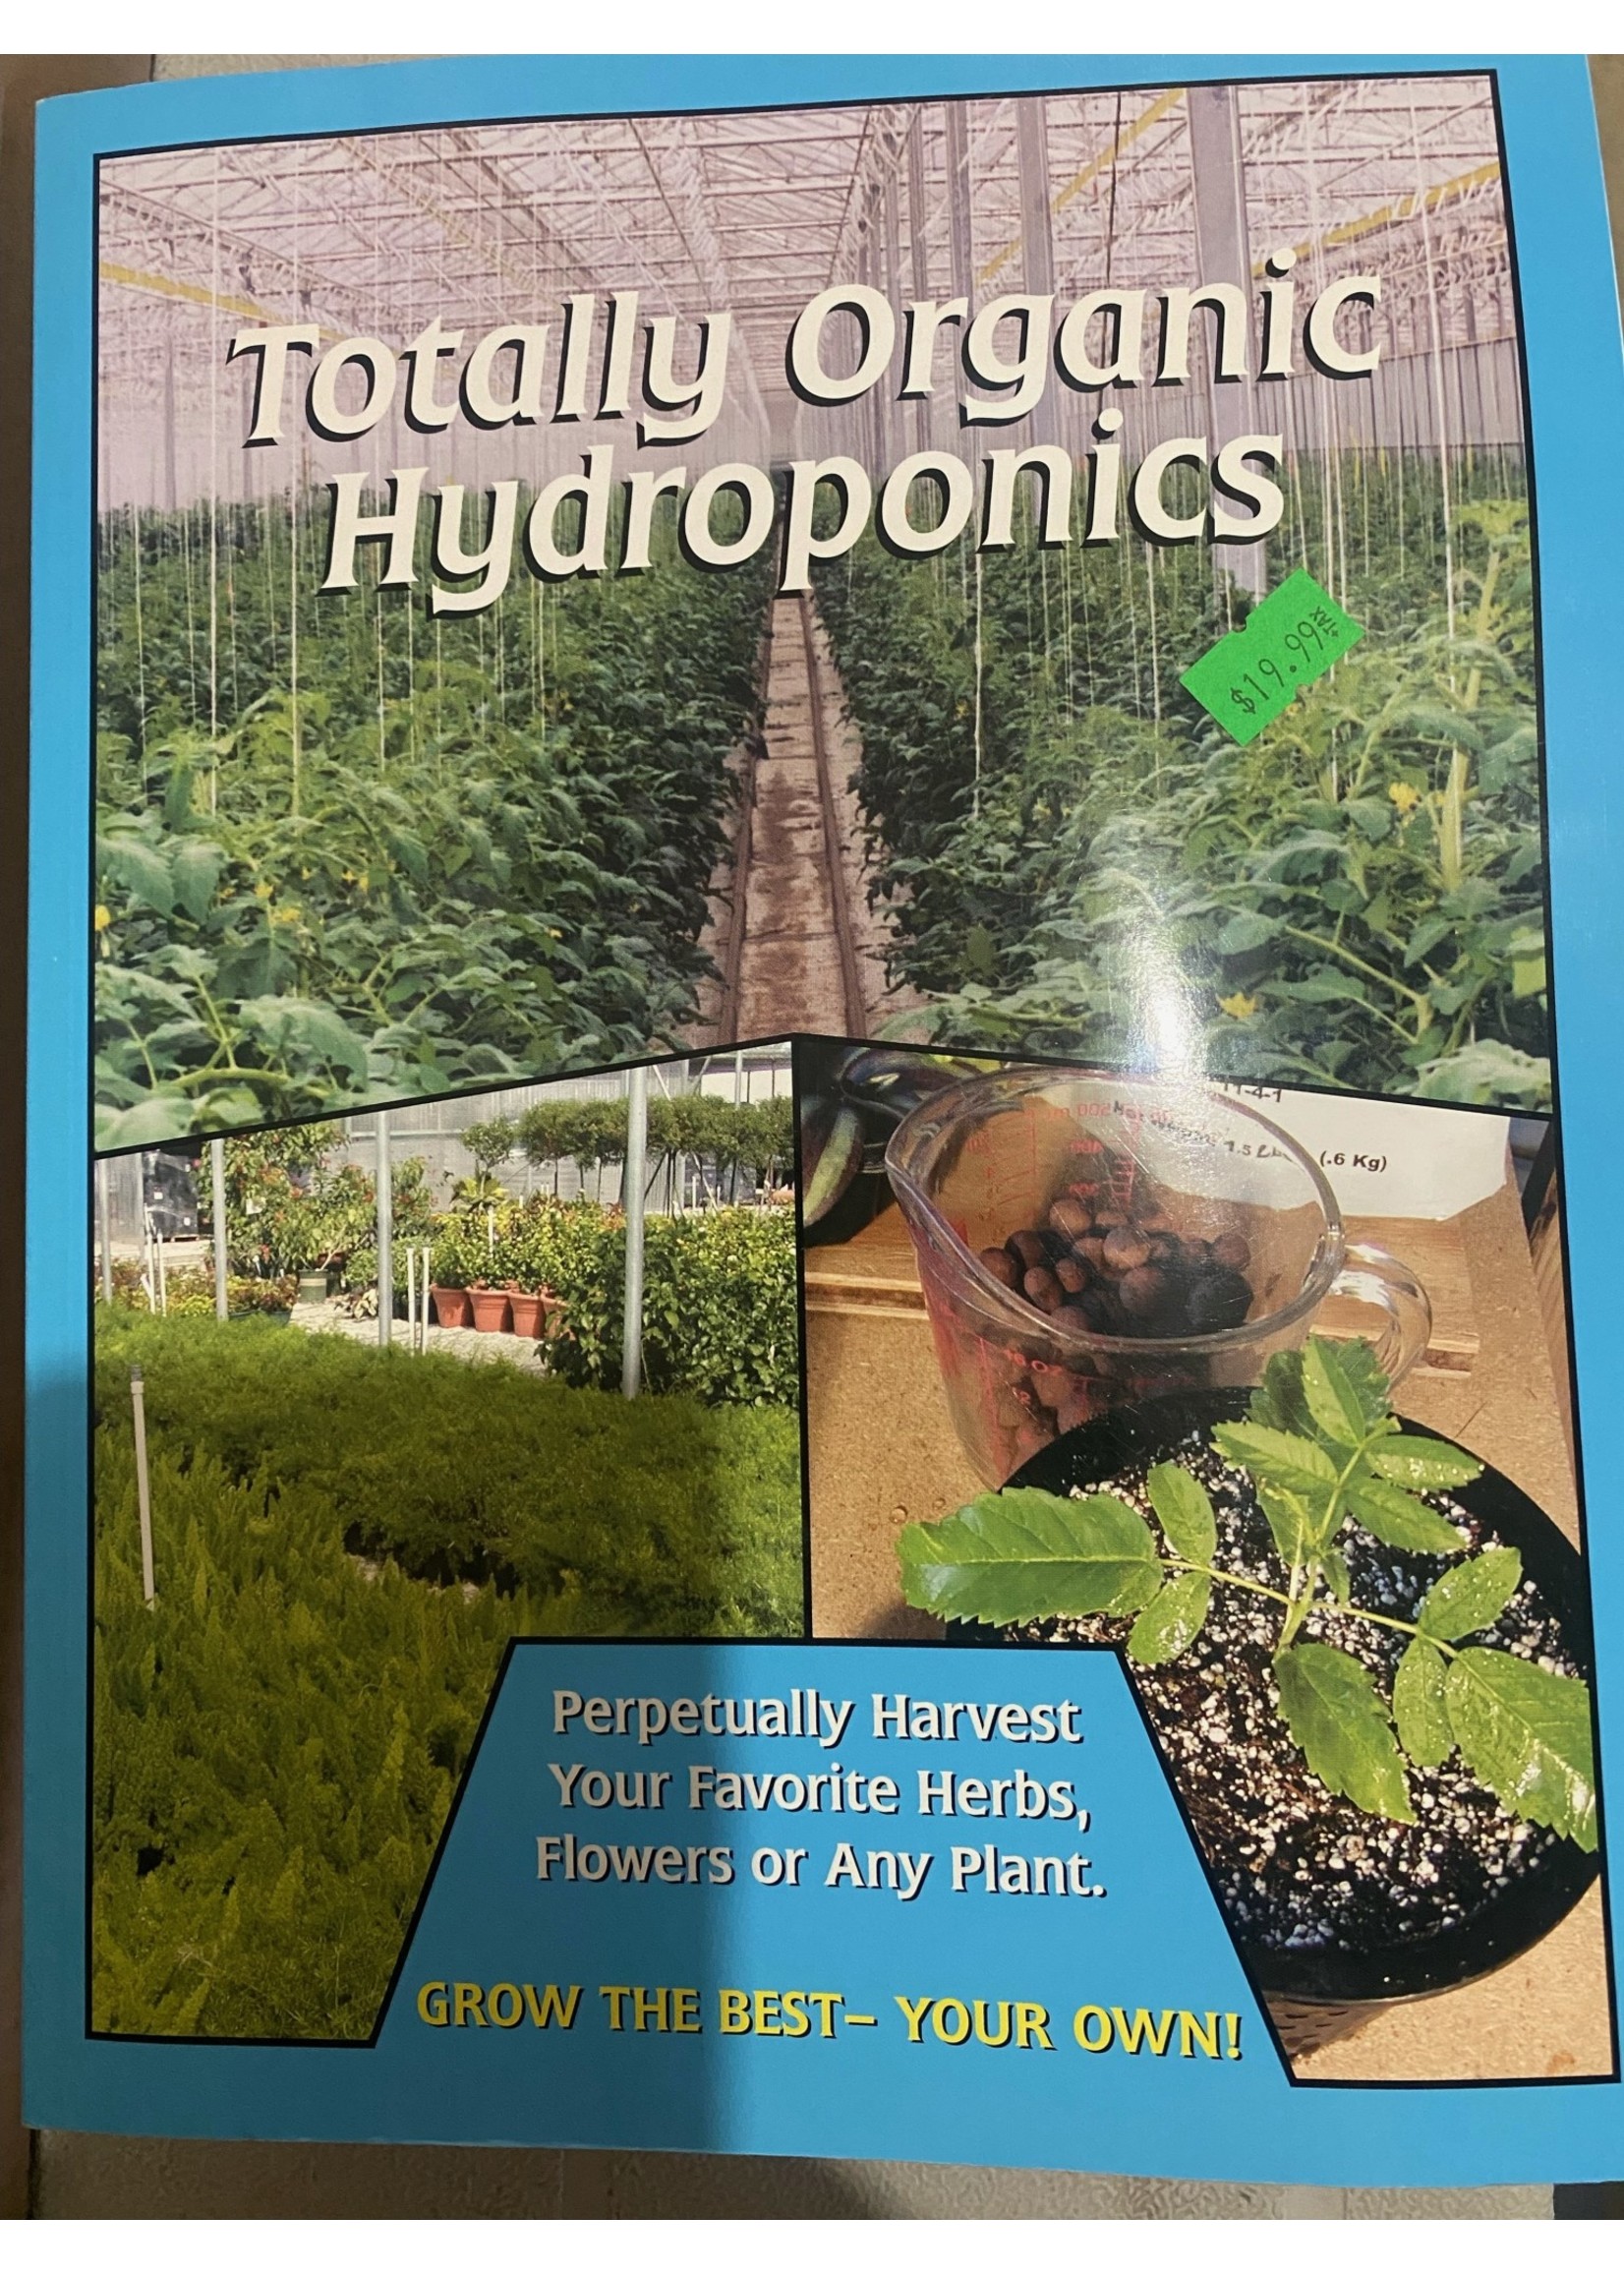 Totally Organic Hydroponics Book by Paul Wright